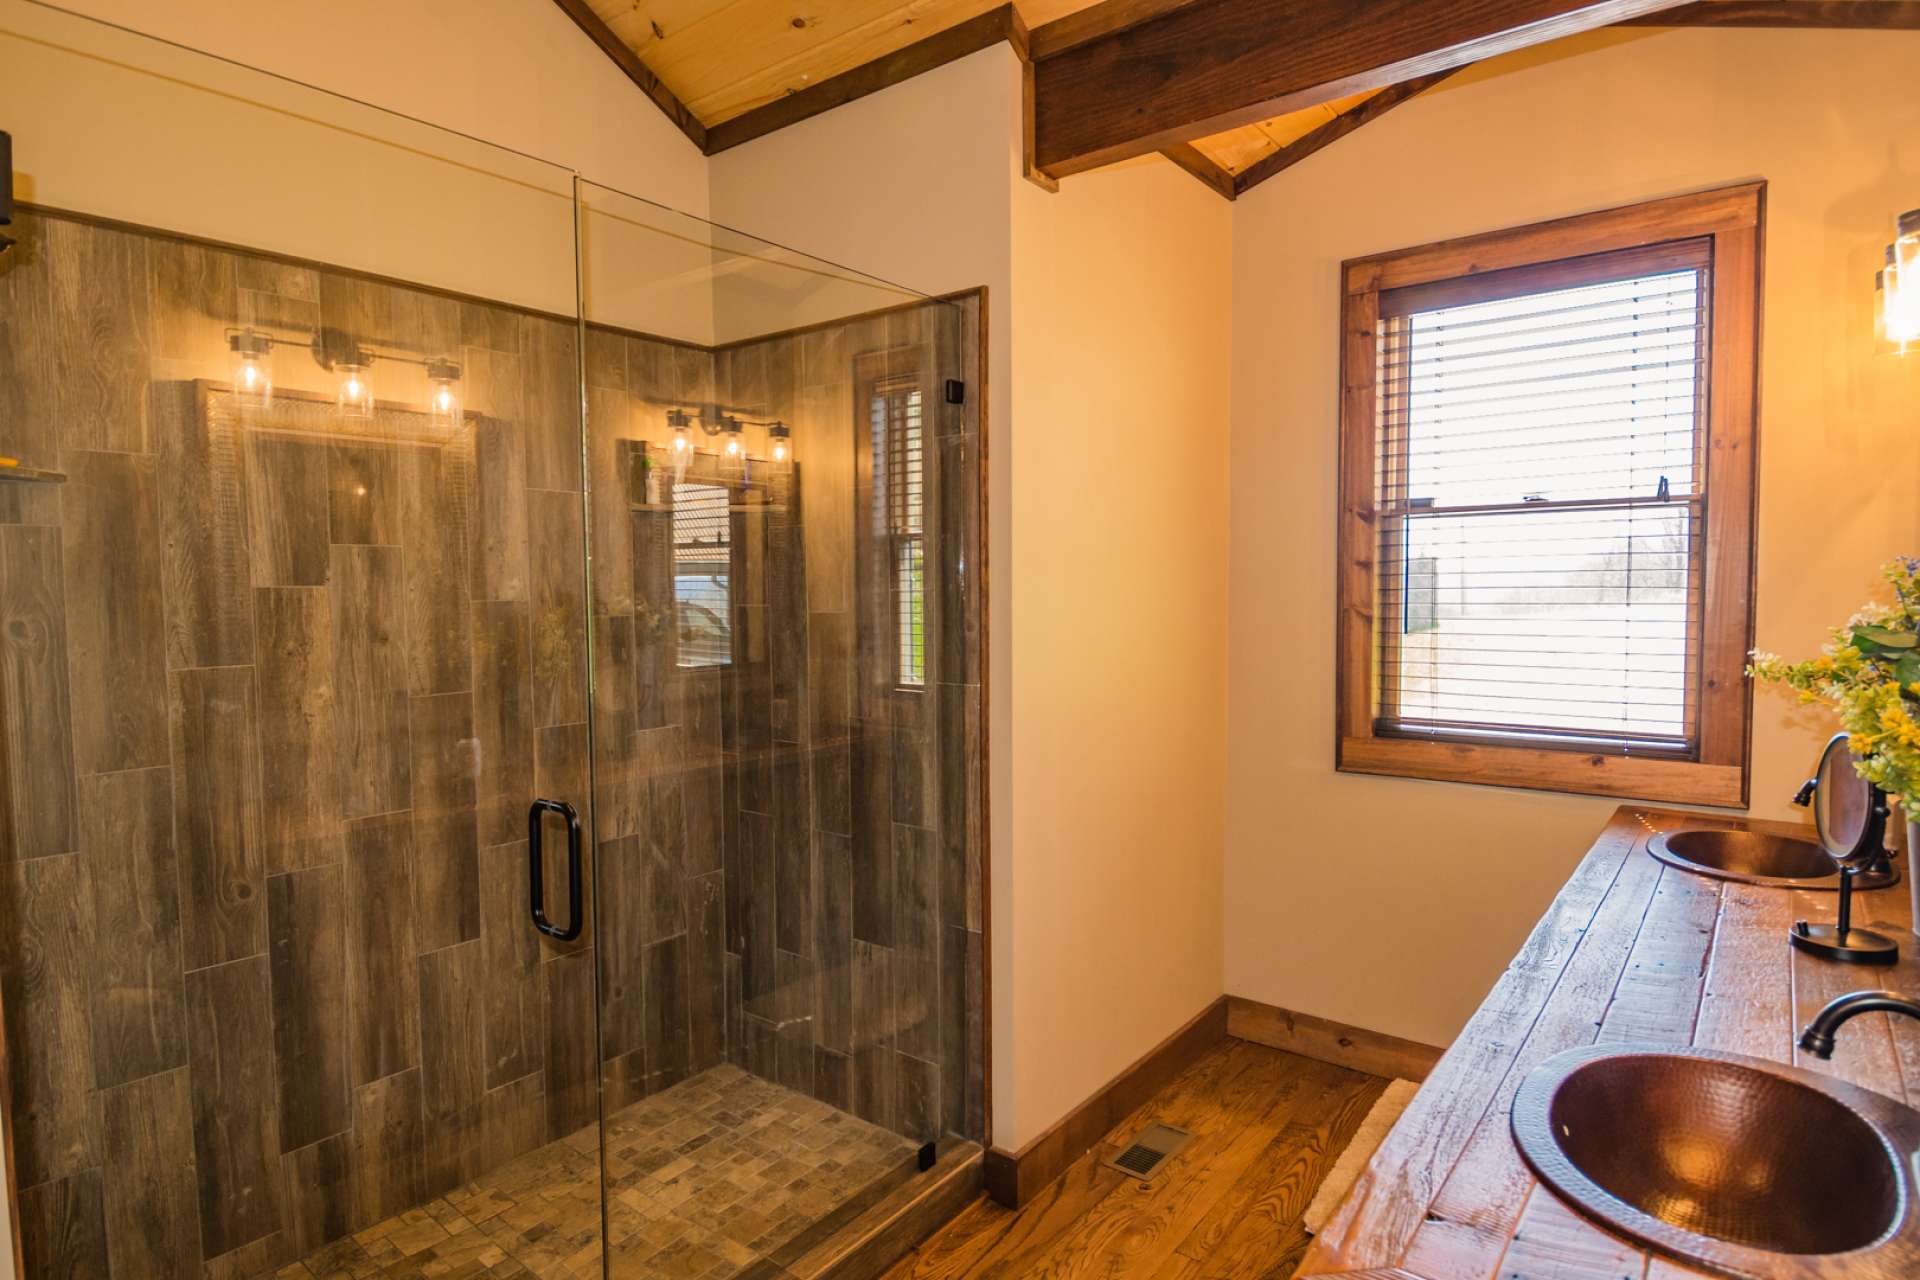 A guest bath and laundry room complete the main level.